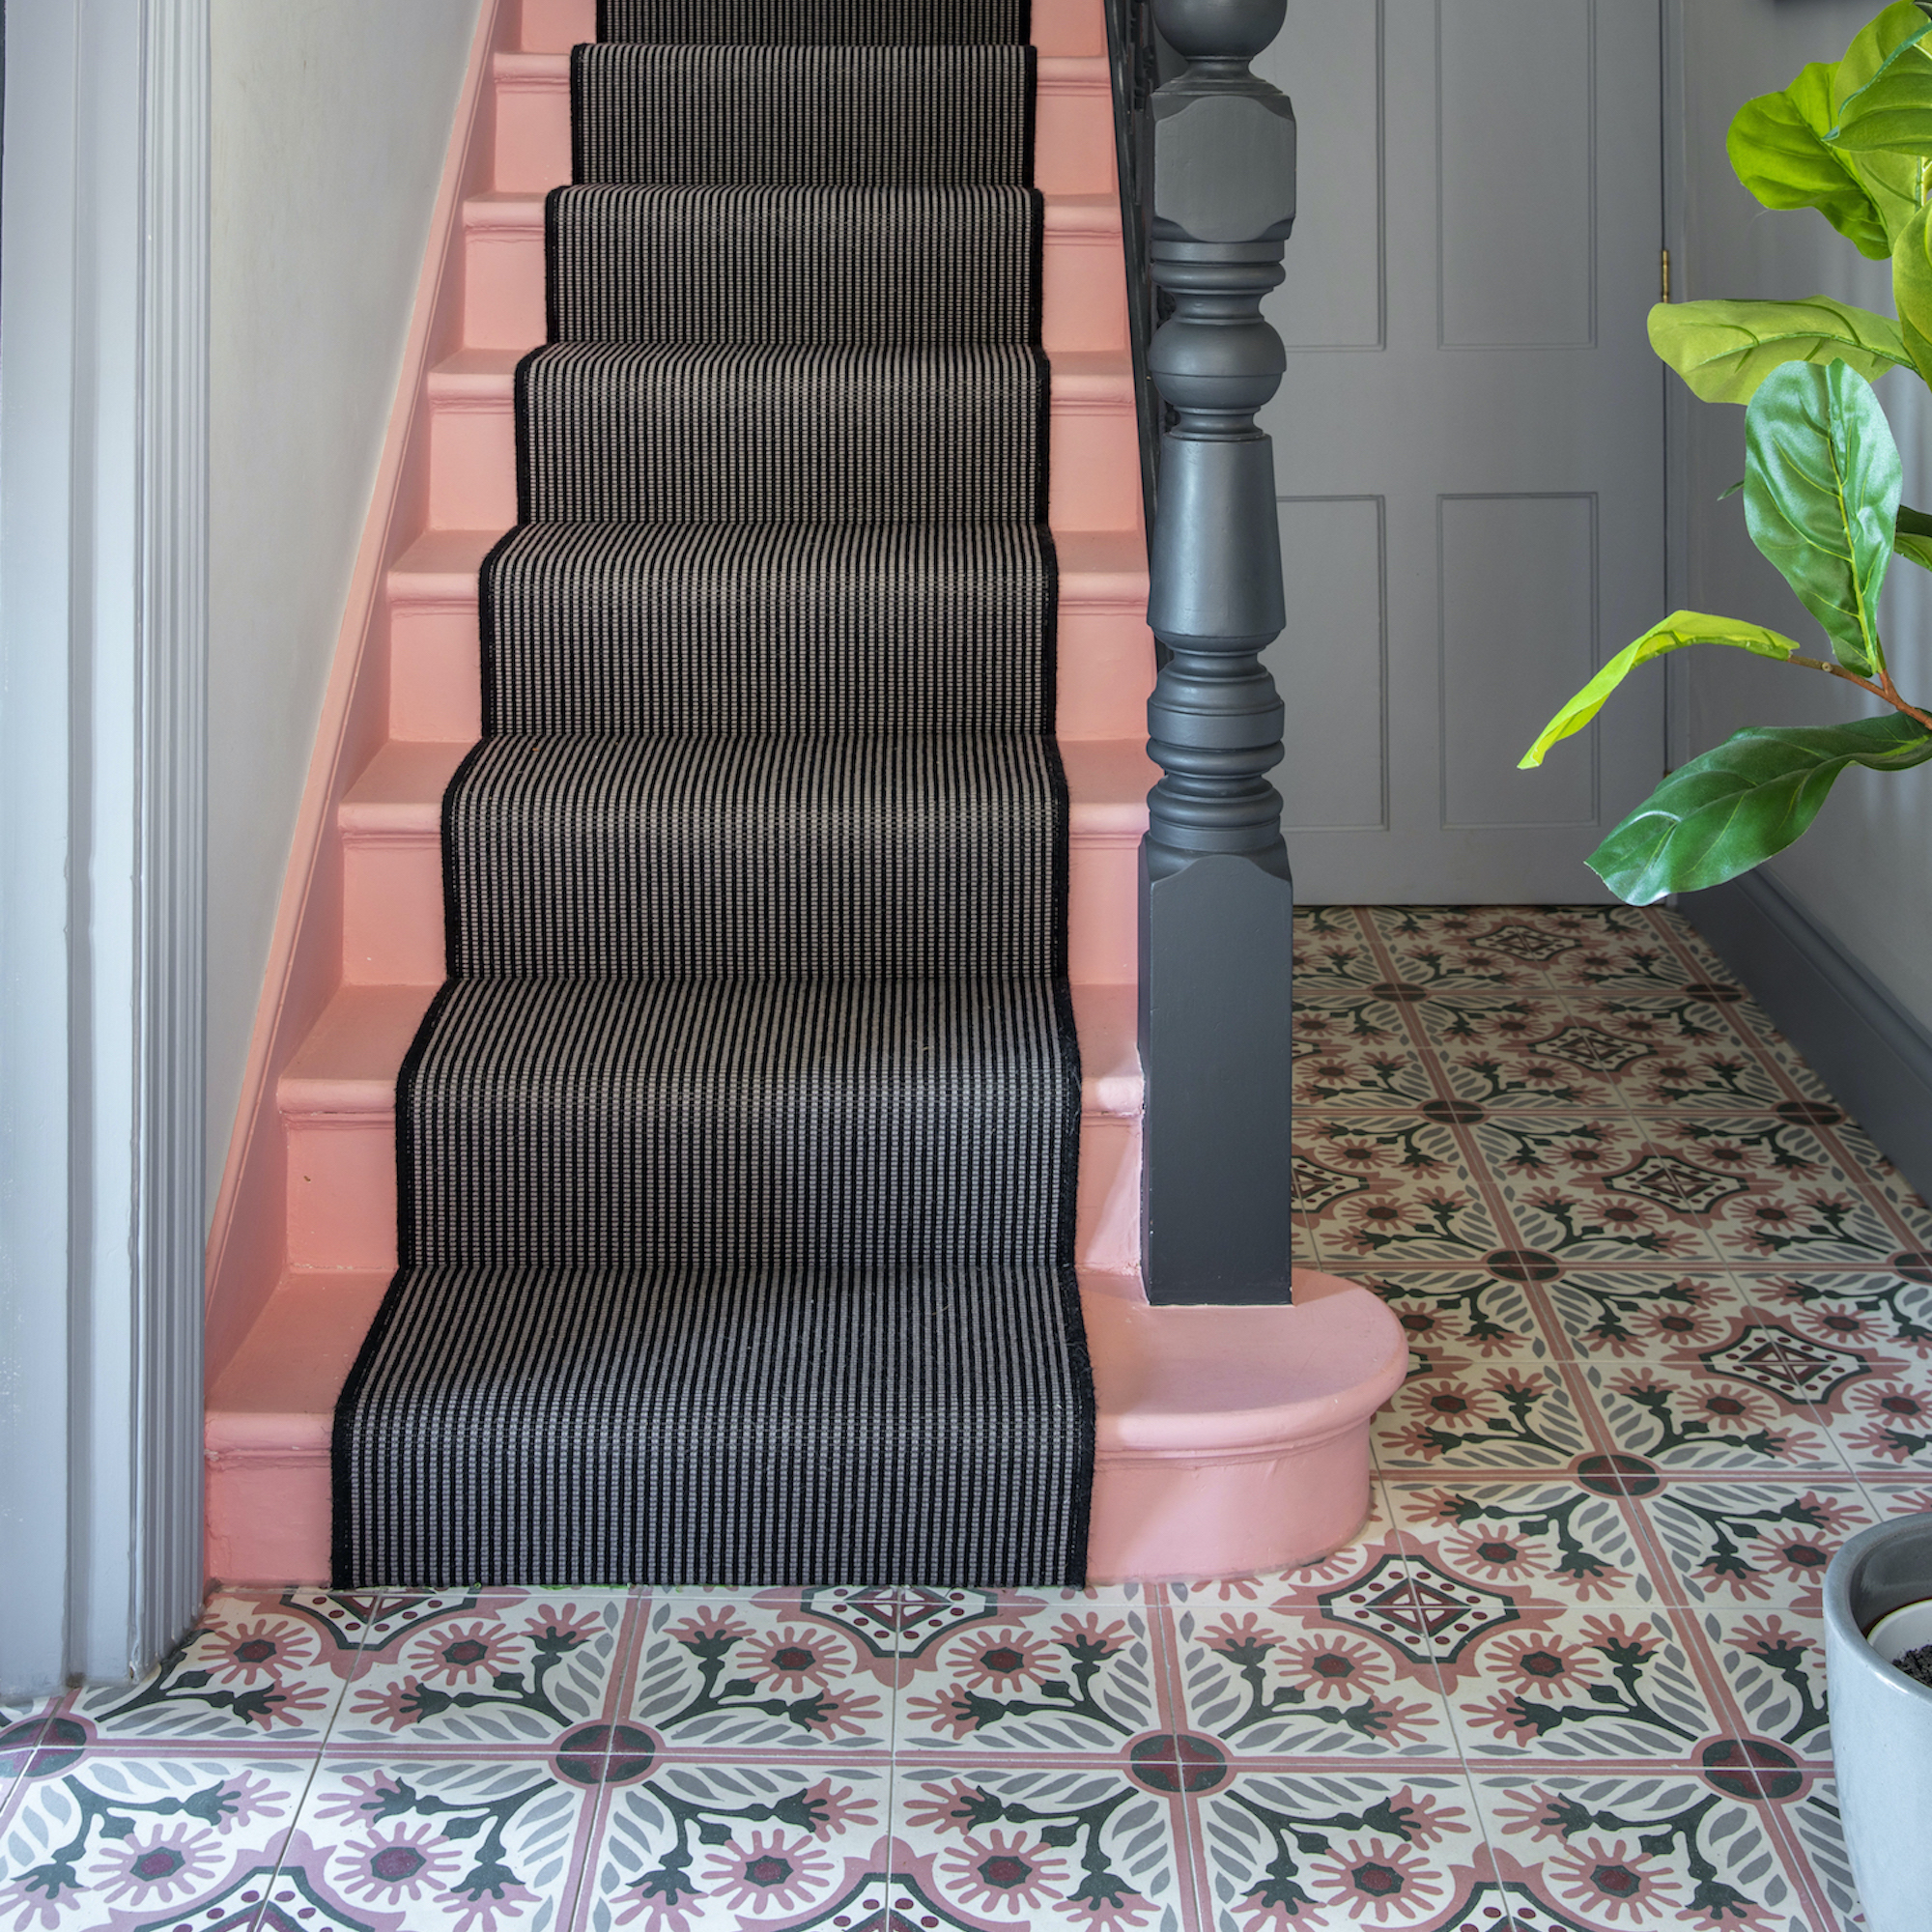 Hallway with patterned tiles and pink steps, black runner